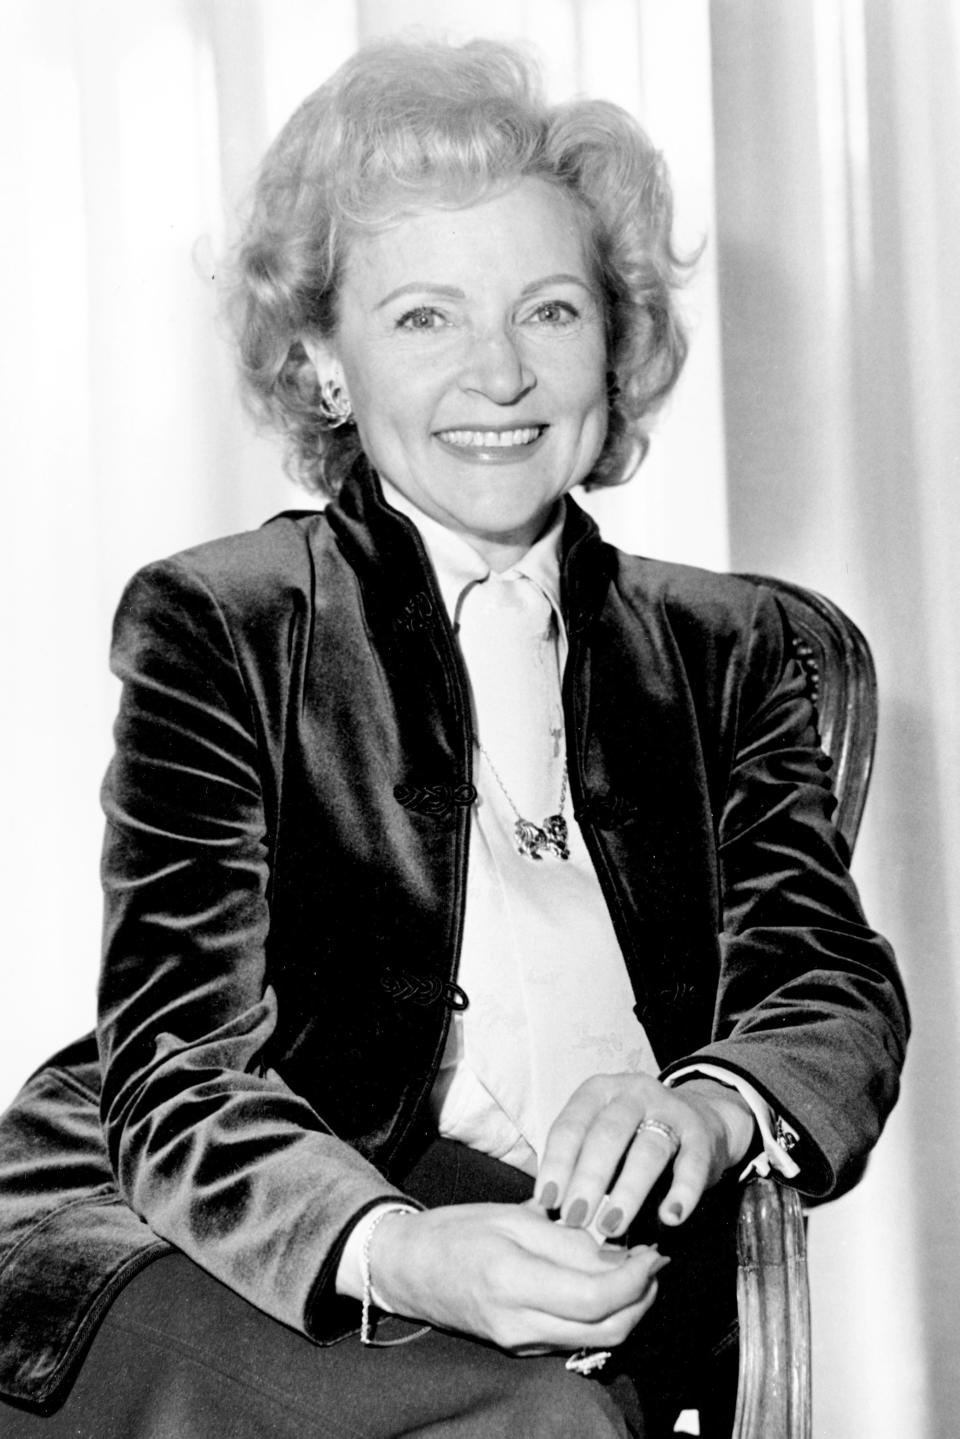 FILE - Actress Betty White poses for a portrait in Los Angeles, Calif., on March 5, 1982. Betty White, whose saucy, up-for-anything charm made her a television mainstay for more than 60 years, has died. She was 99. (AP Photo/Reed Saxon, File)